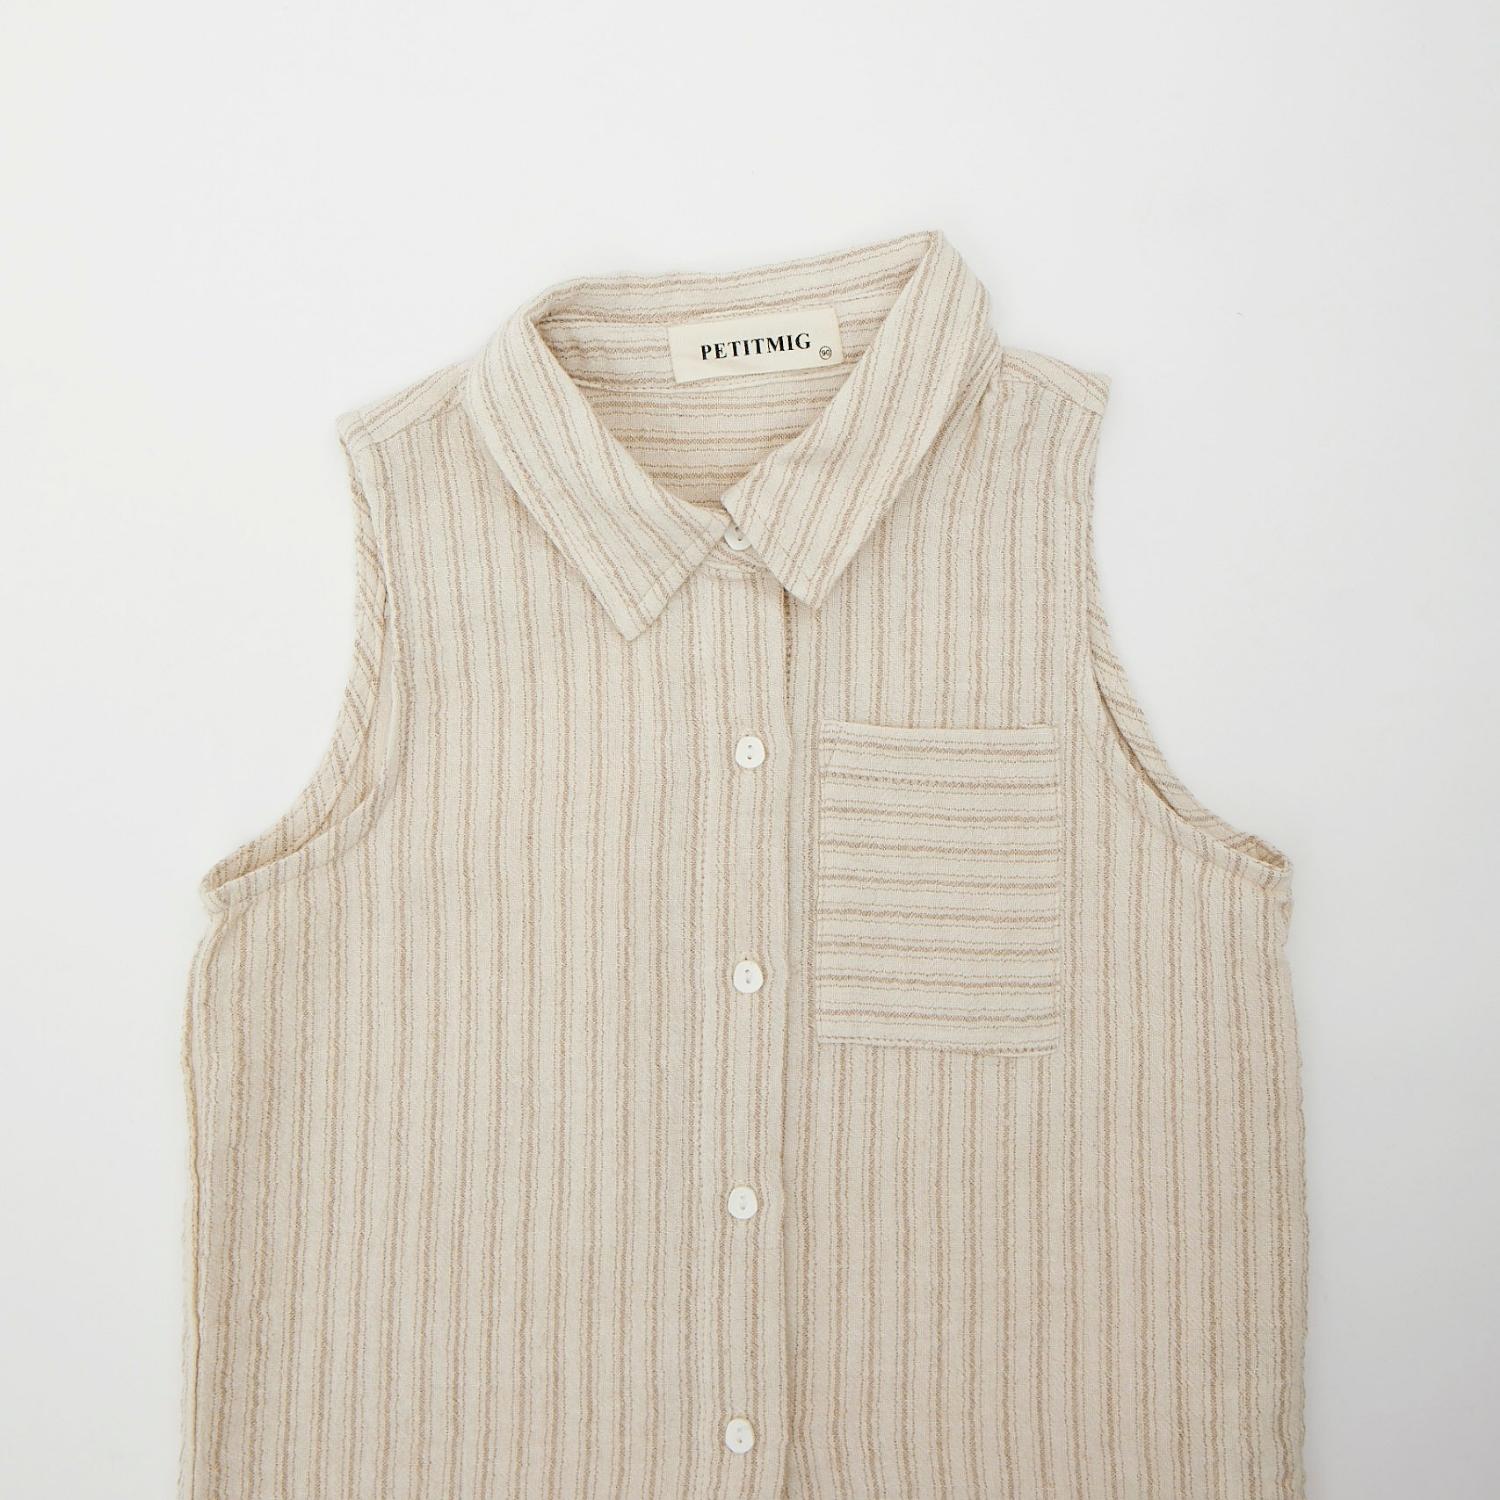 [Outlet] Stripe No Sleeve Shirt